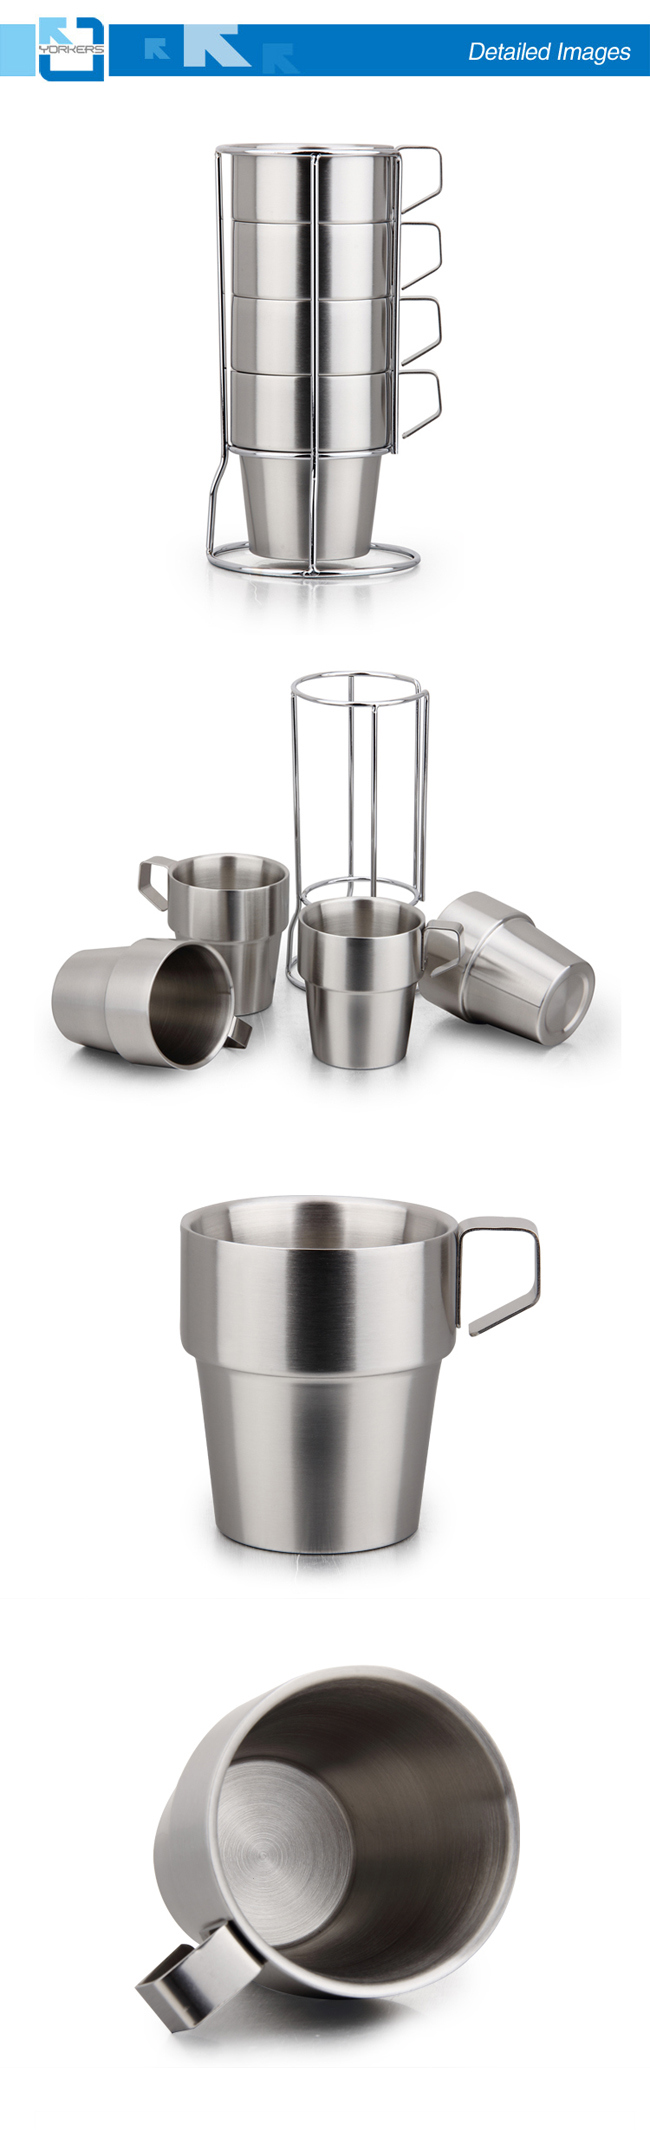 4 Pieces 300ml Stainless Steel Coffee Cup with Holder Tea Mug Cup Sets